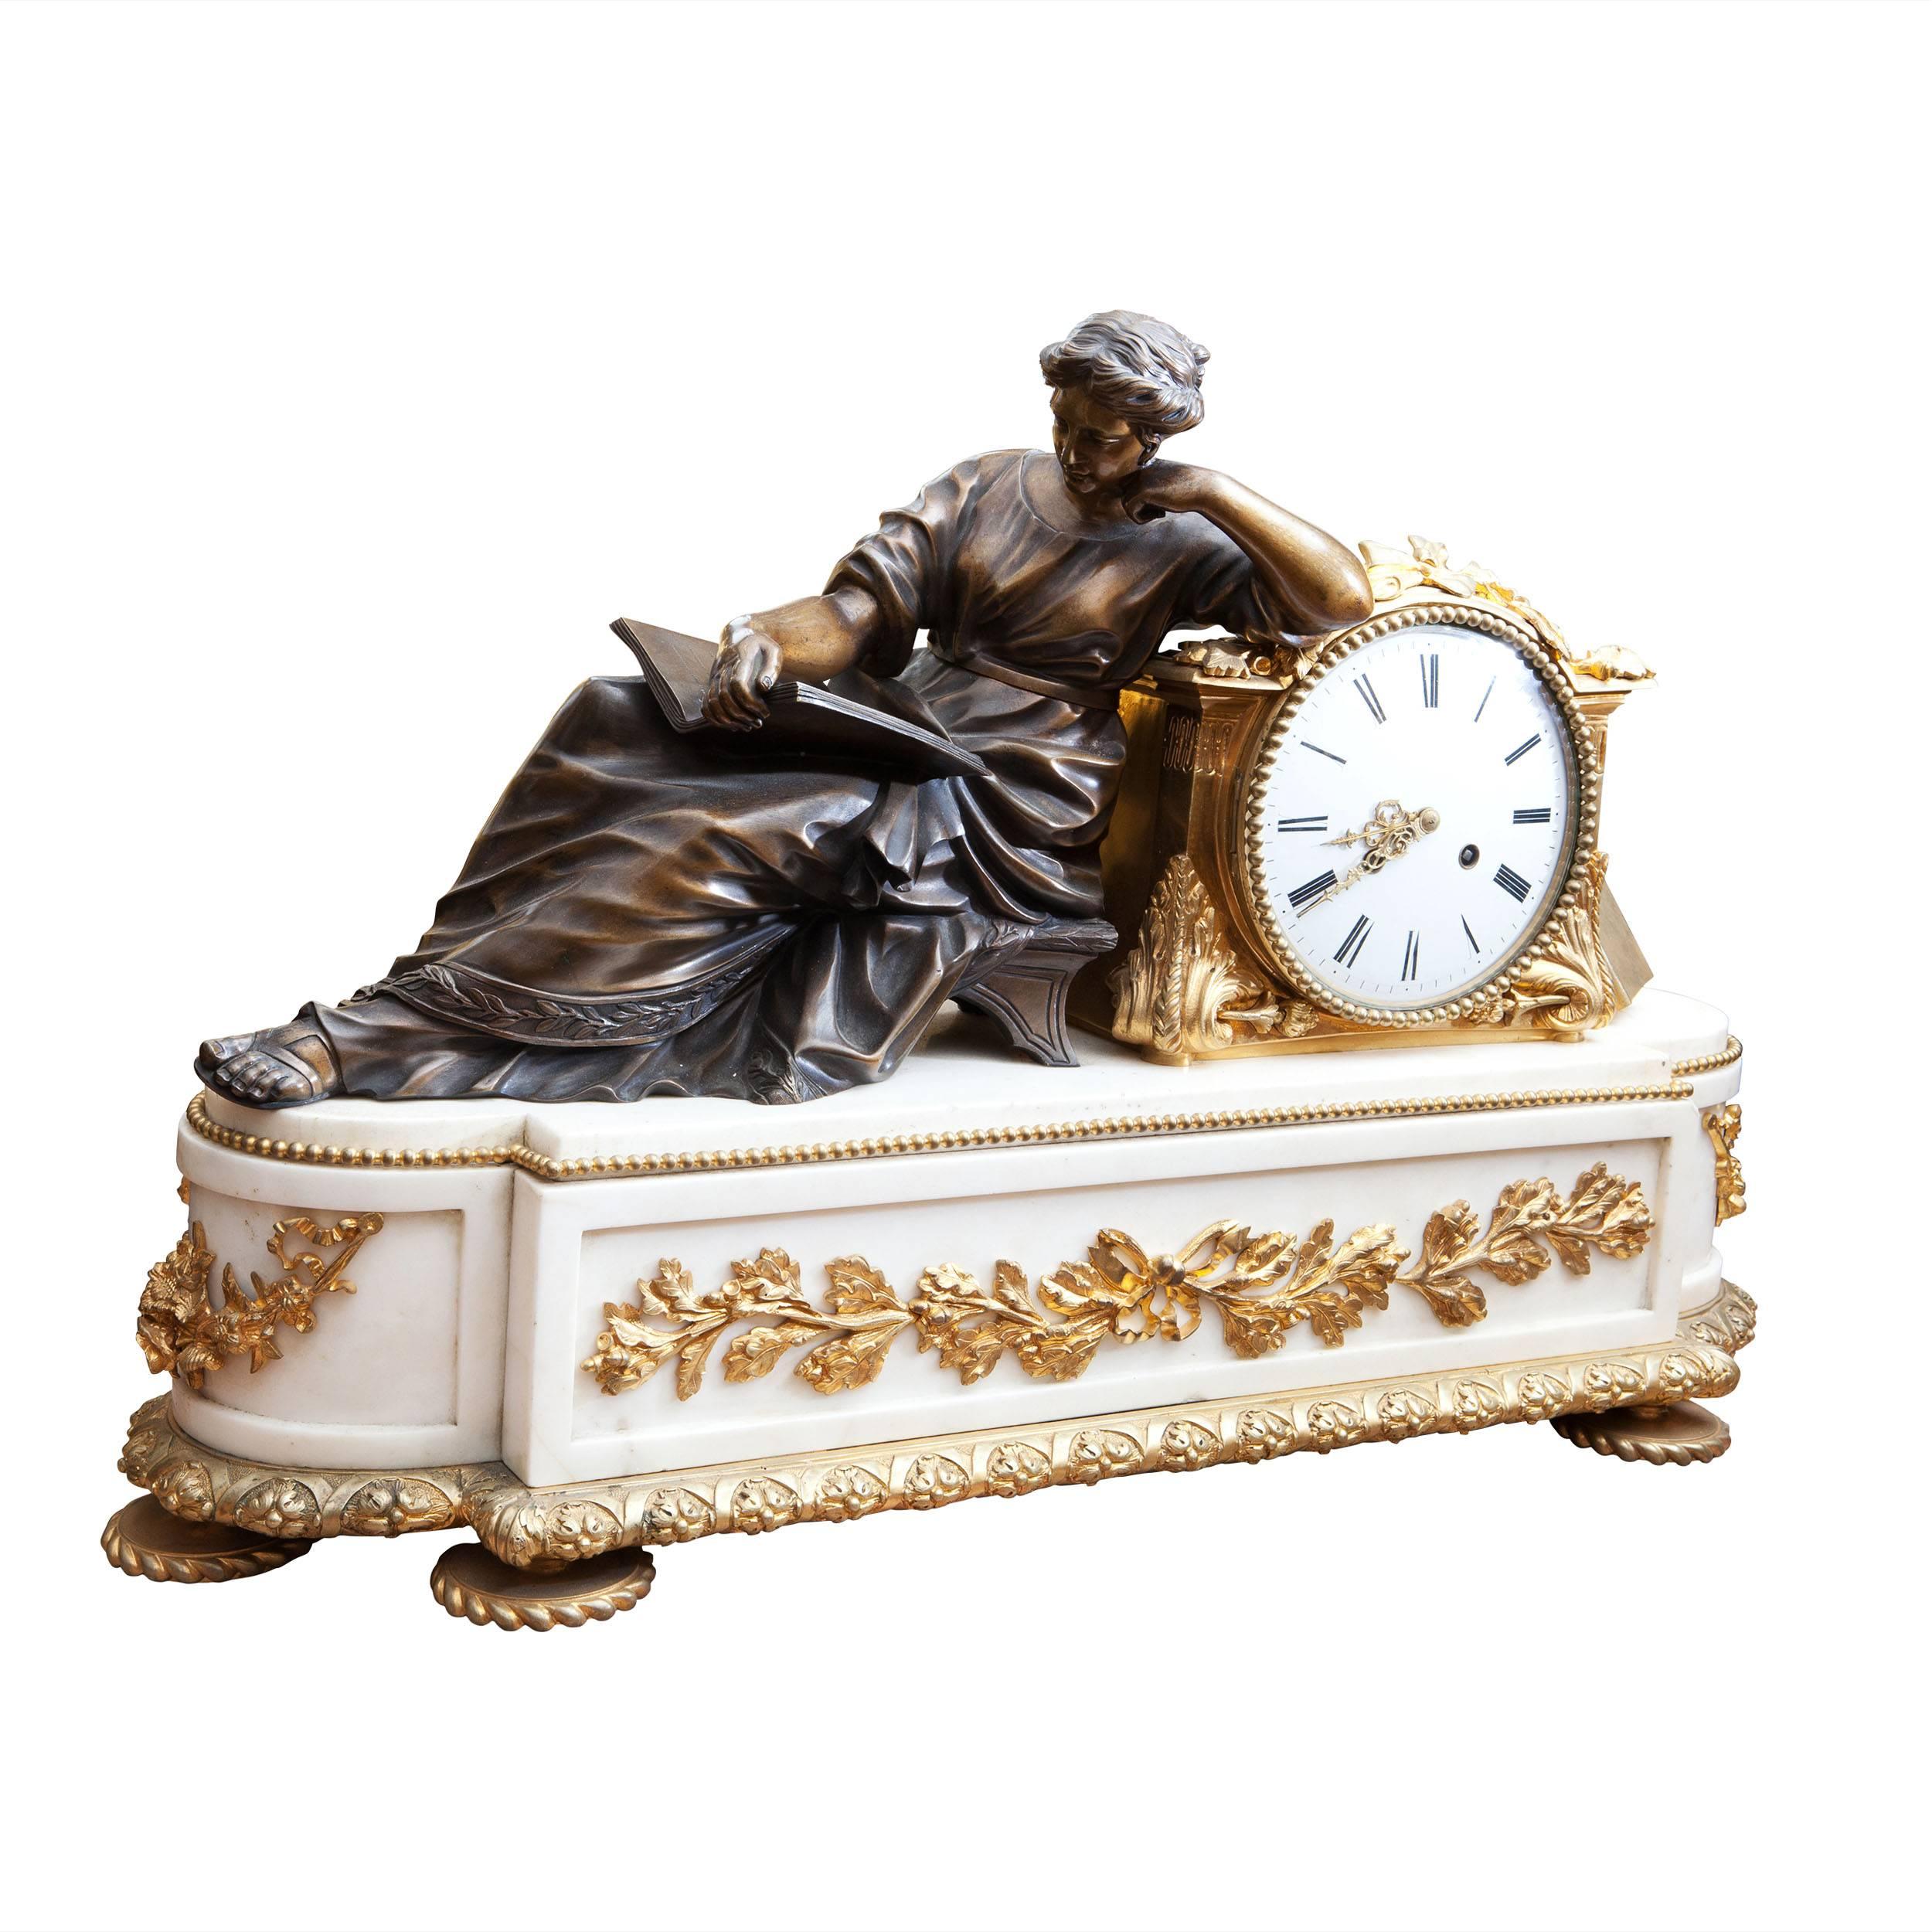 France, circa 1860-1880.

A fine late 19th century large white marble and ormolu mantel clock with a finely cast and patinated bronze lady reading.

The clock is in superb condition and has been restored by a specialist in French clocks.